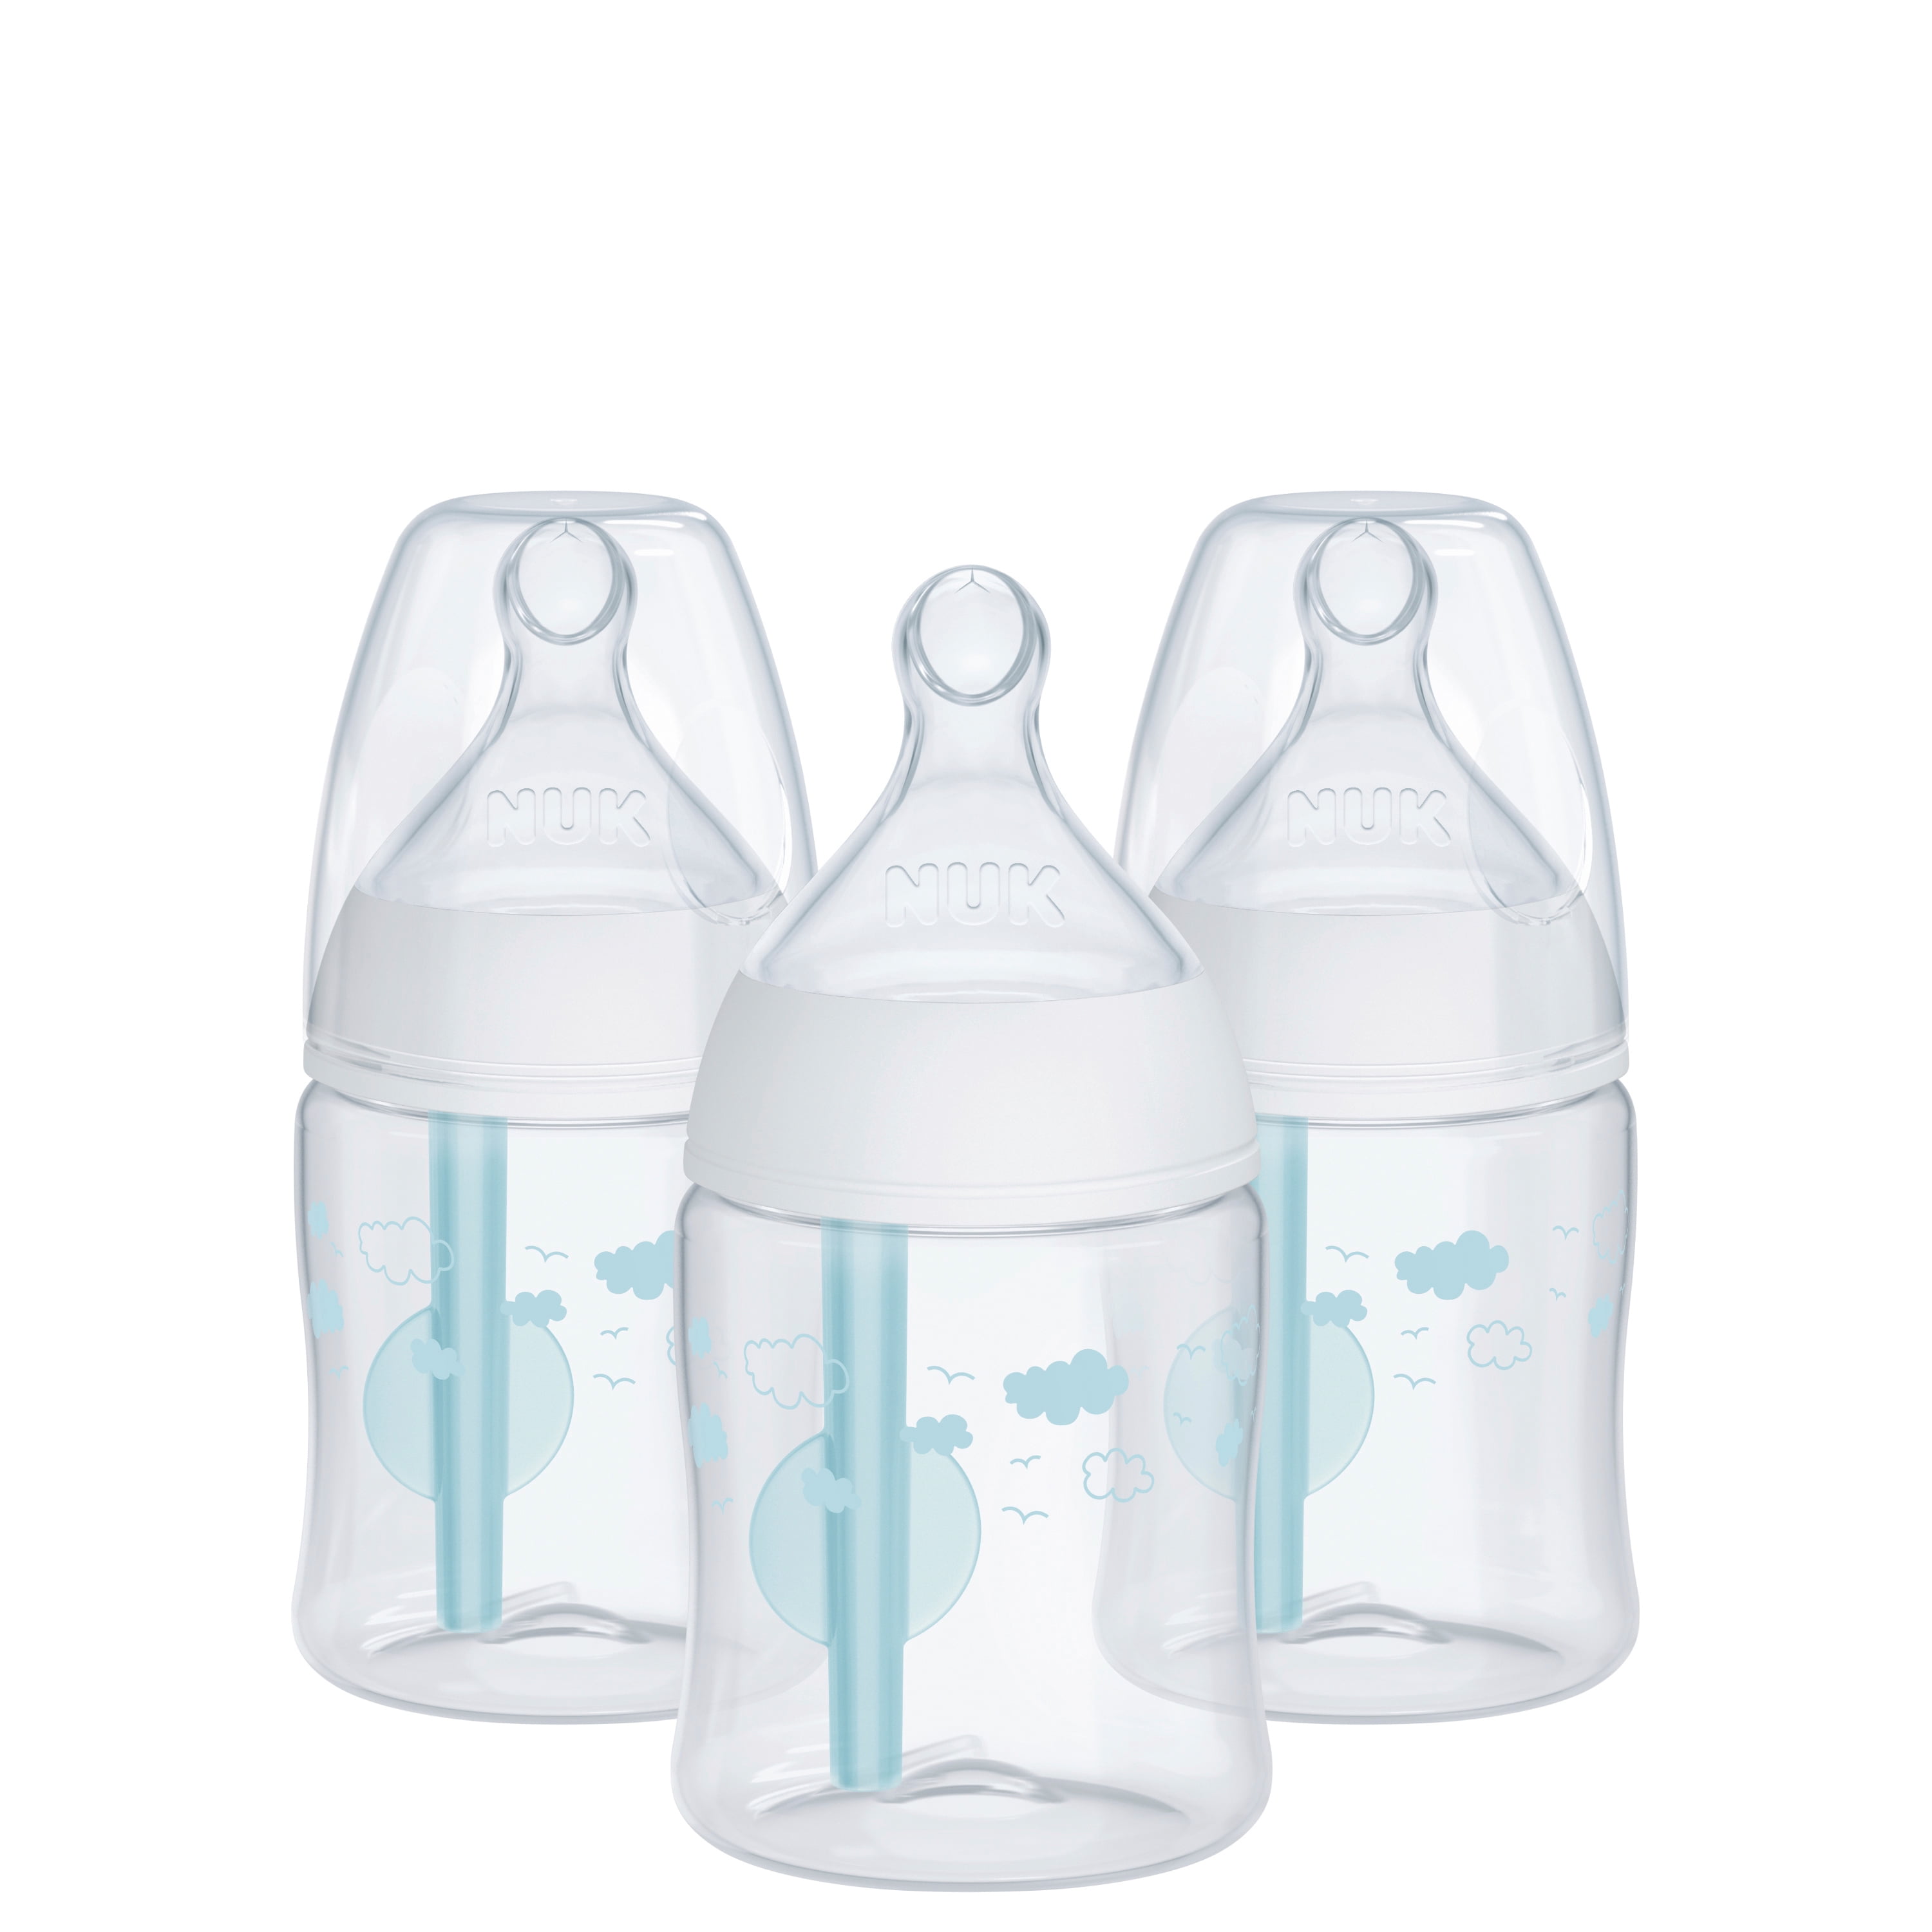 Lifefactory Launches New Wide Neck Stainless Steel Baby Bottle System